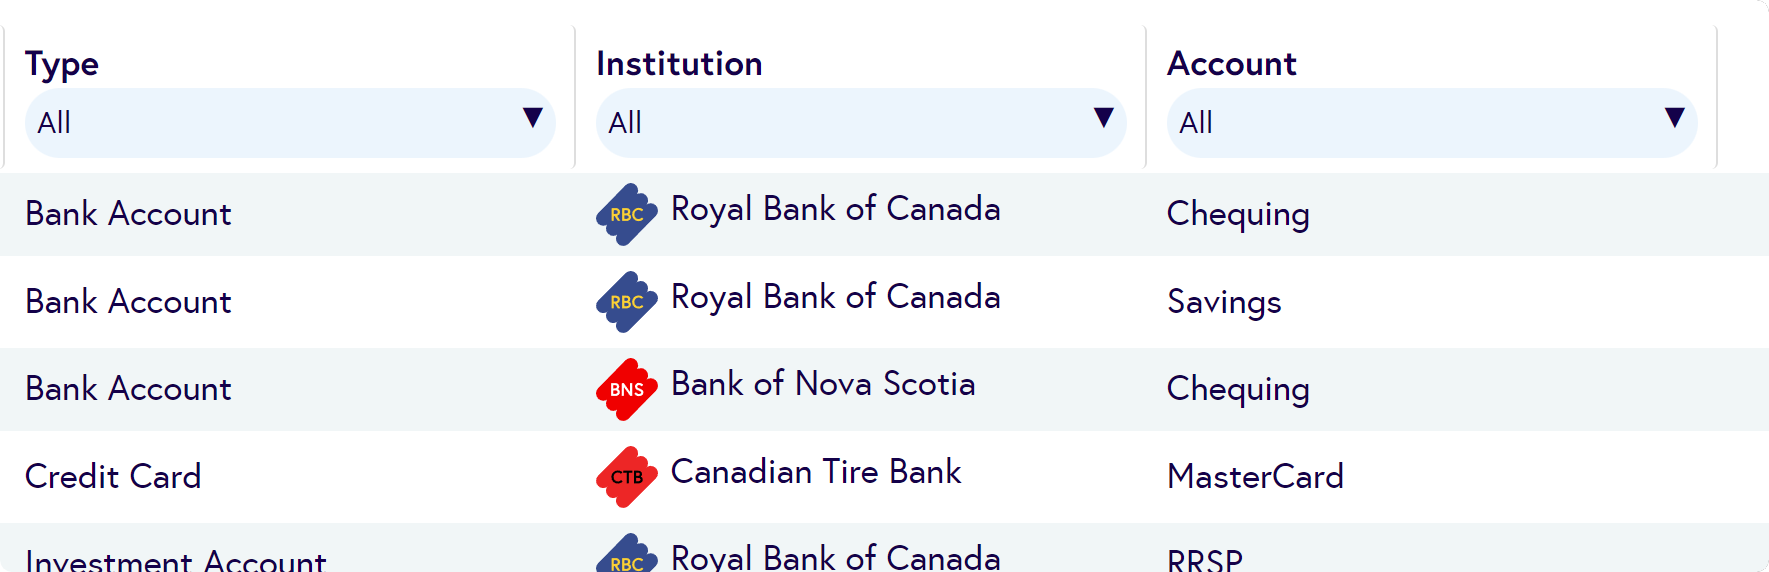 Page showing connected bank accounts across multiple institutions